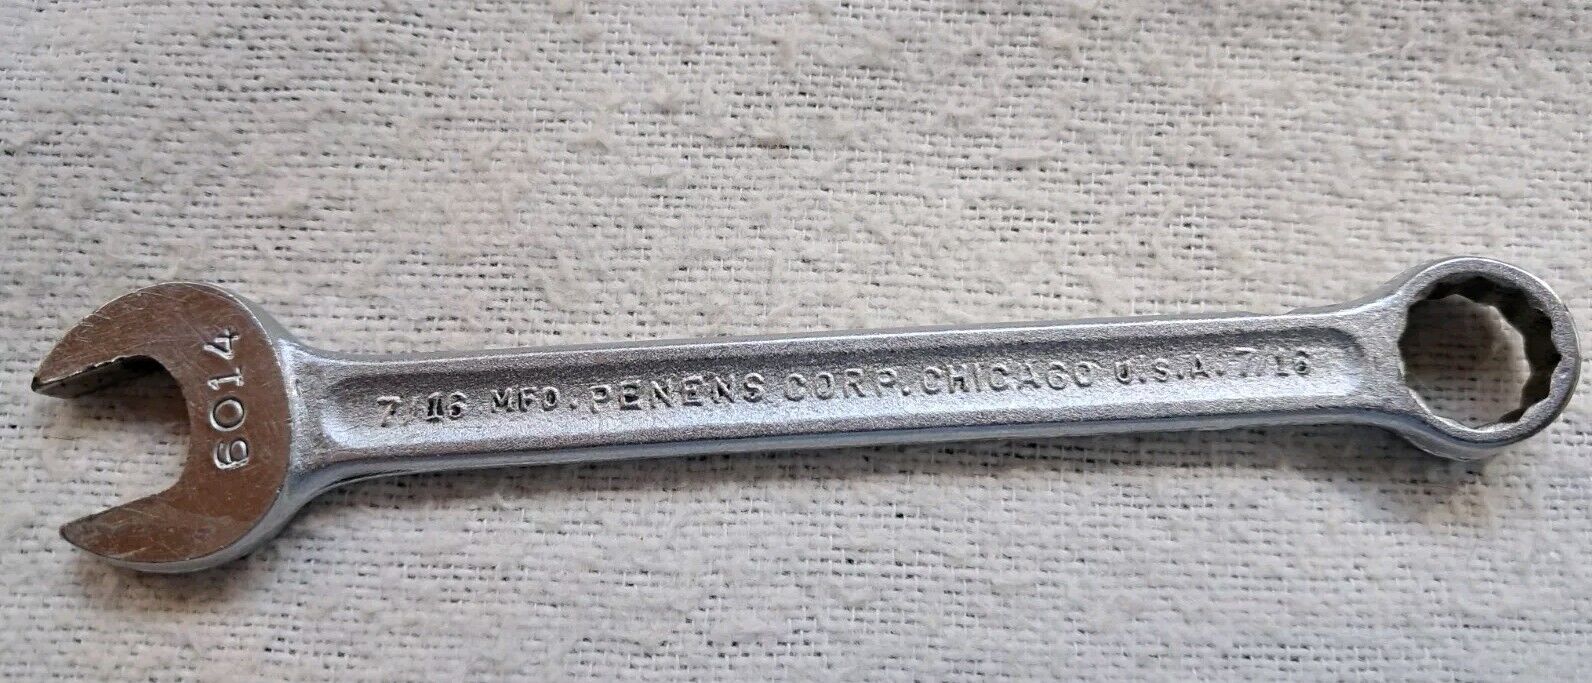 Vintage Penens Corp Chicago 7/16” 12 Point Combination Wrench USA  6014